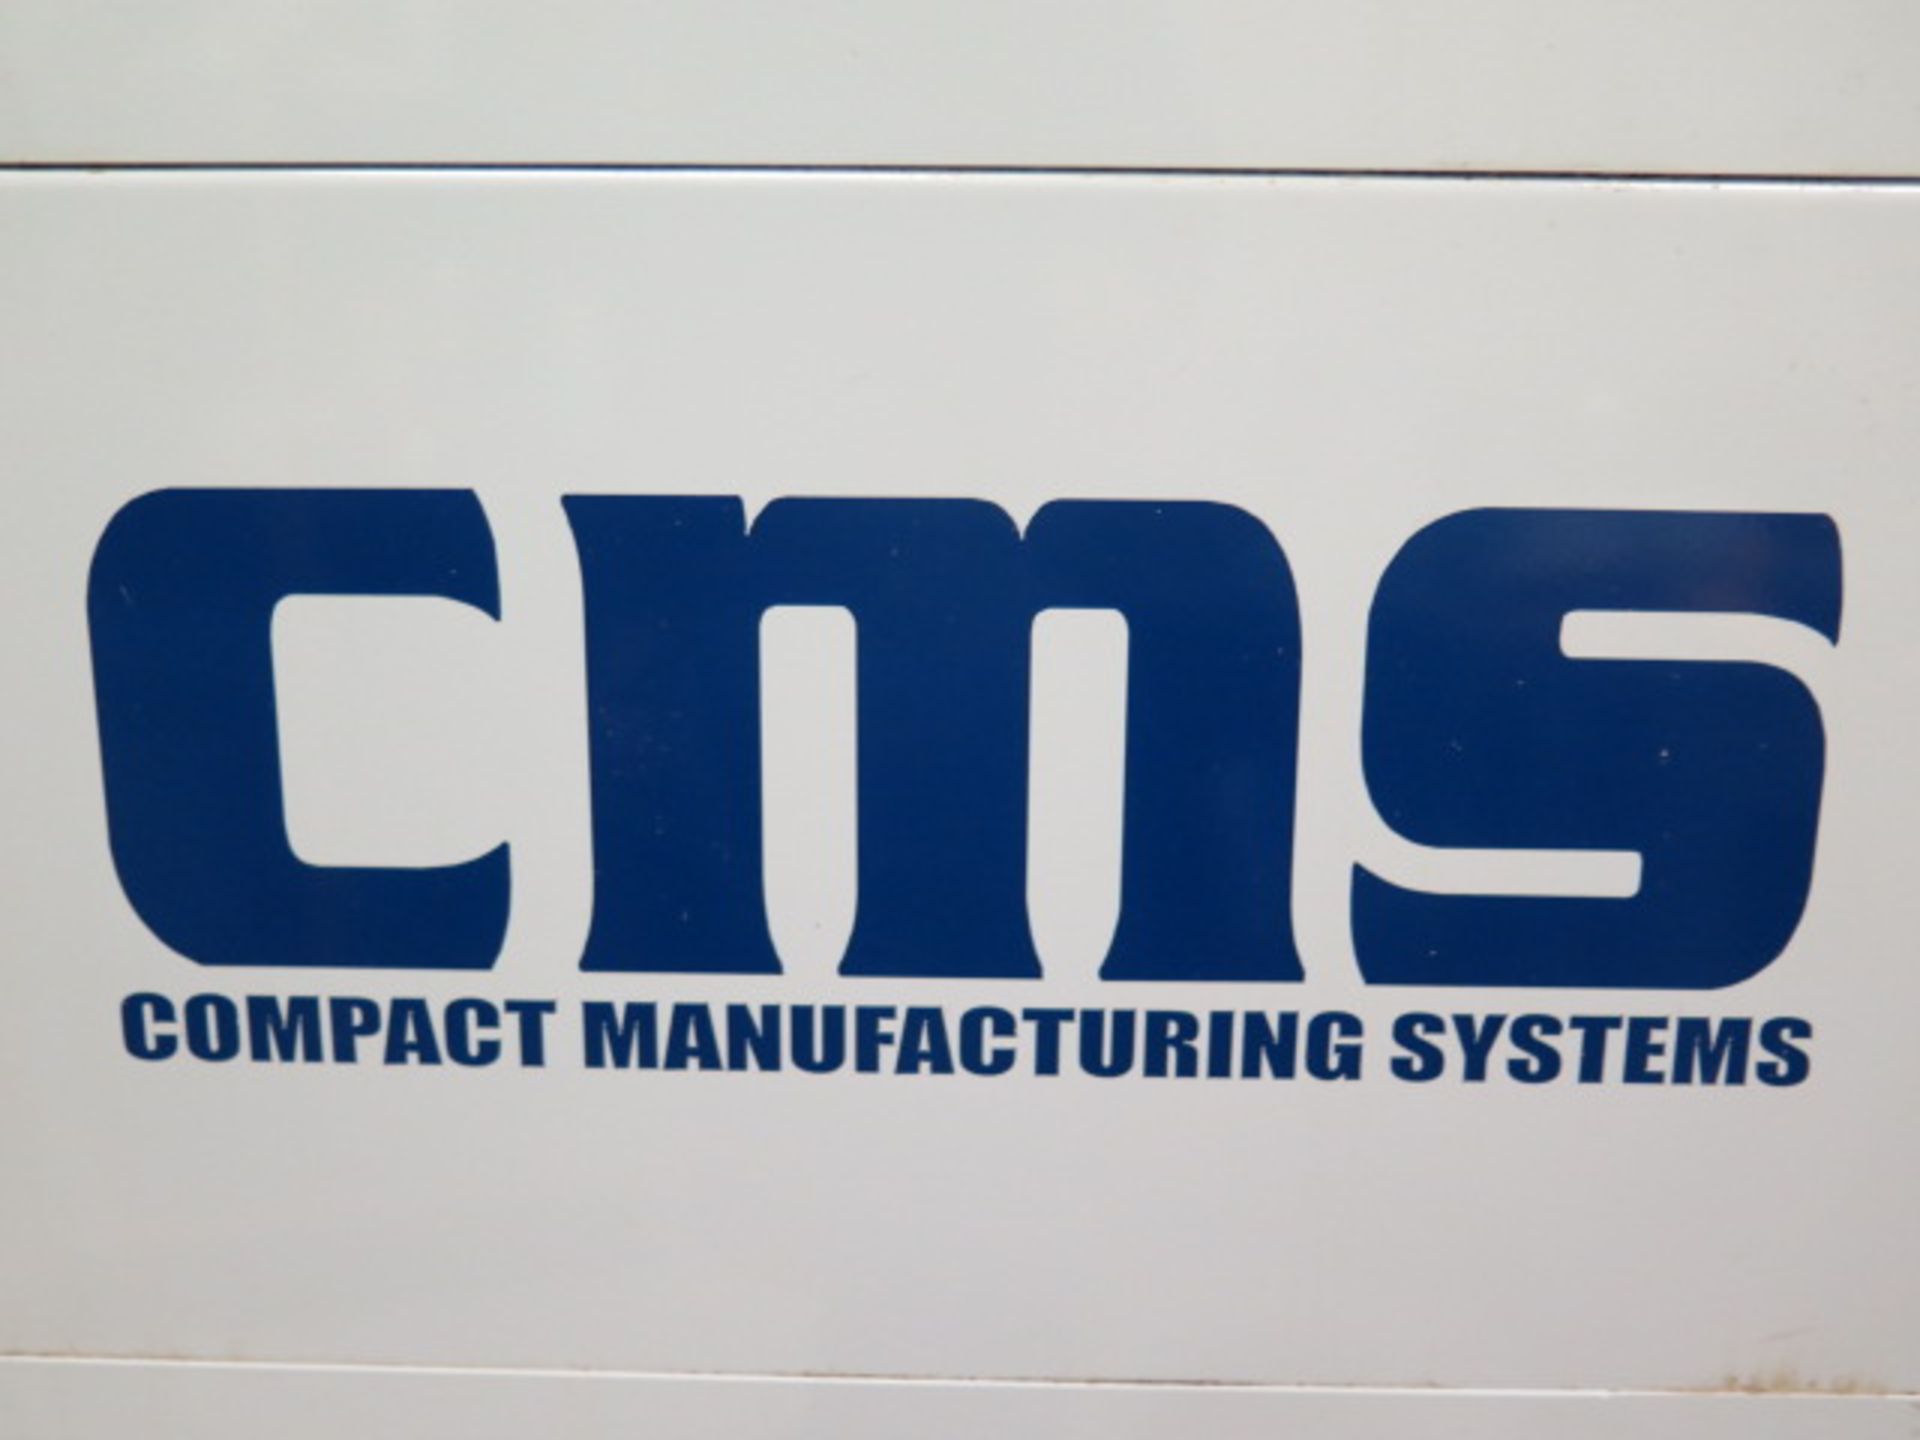 CMS mdl. GTD CNC Cross Slide Lathe w/ Fagor CNC Controls, 6000 RPM, 5C Collet Closer, SOLD AS IS - Image 14 of 14